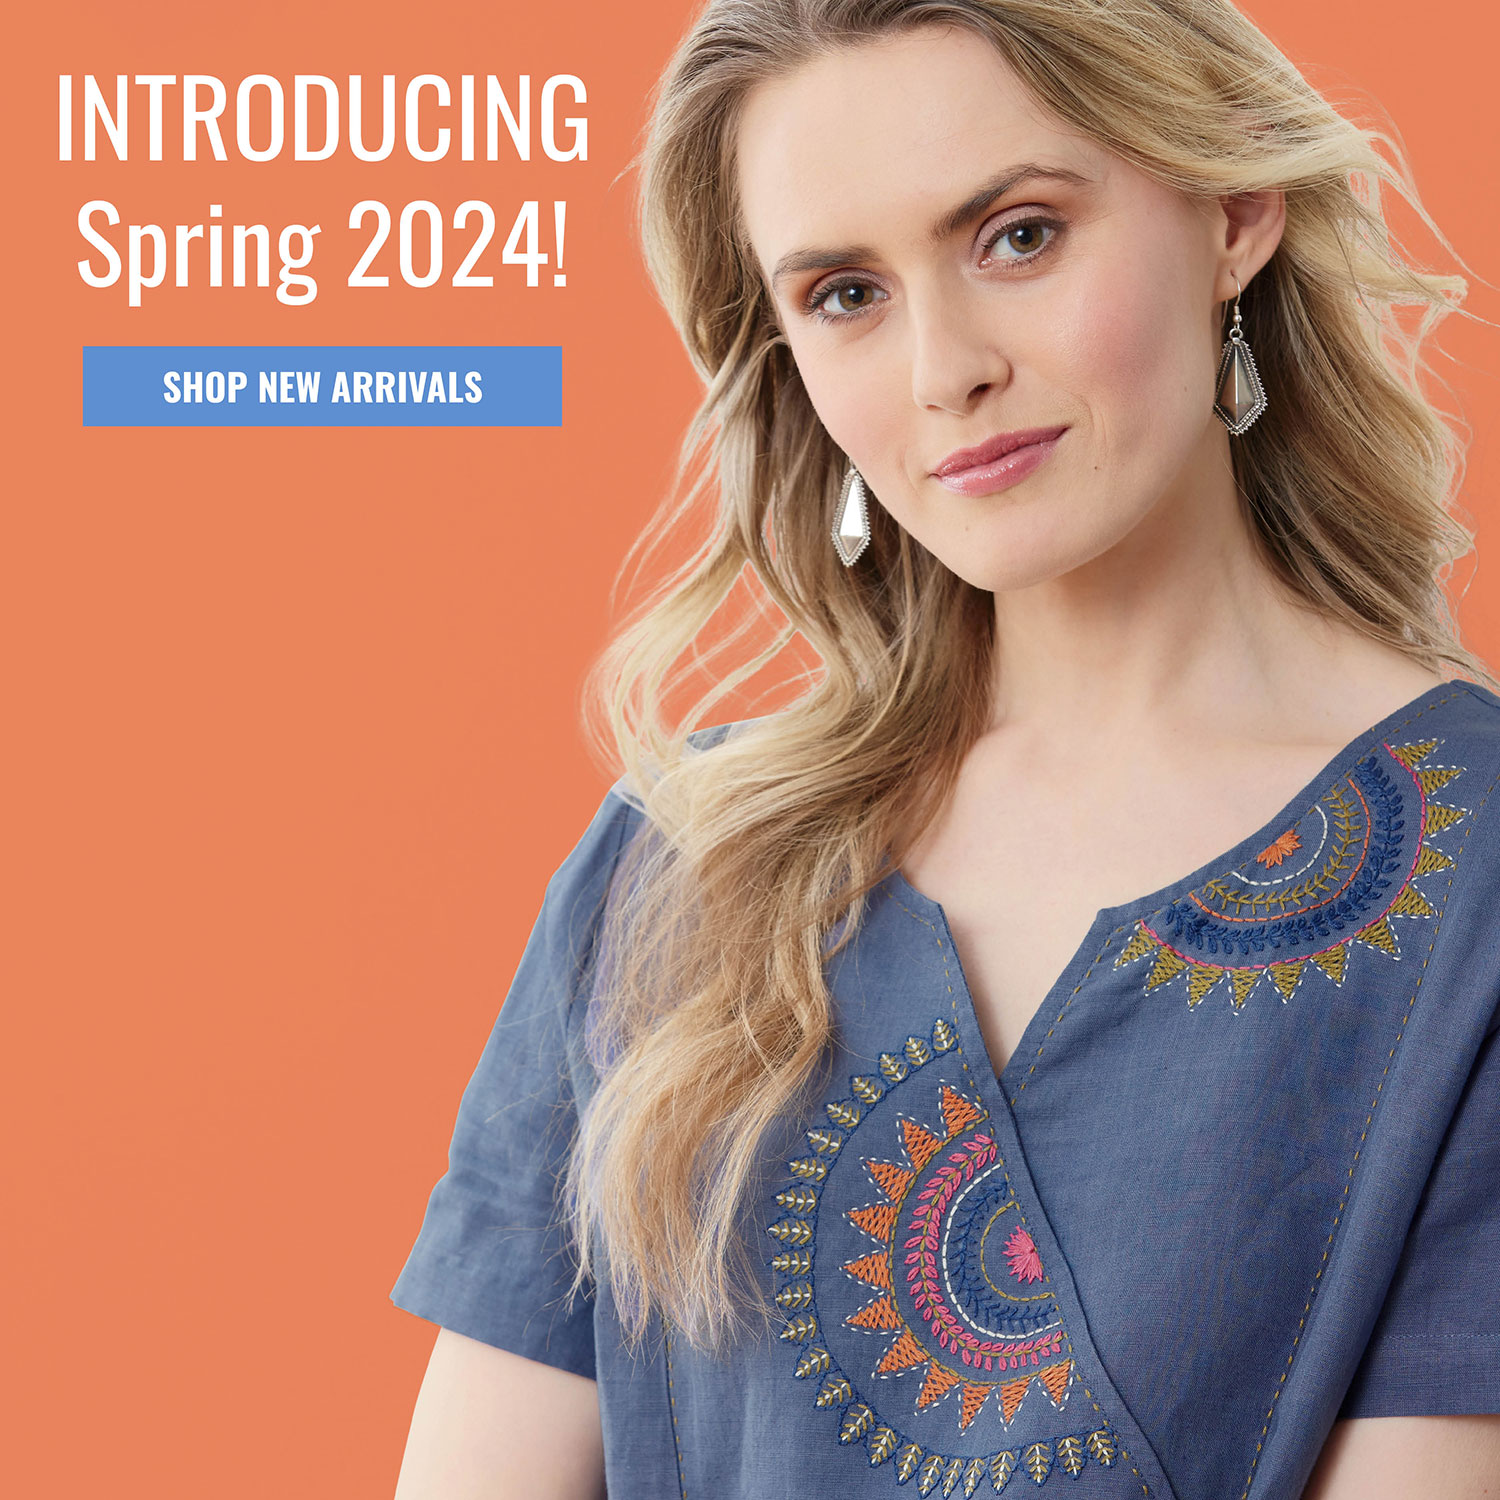 INTRODUCING Spring 2024! SHOP NEW ARRIVALS